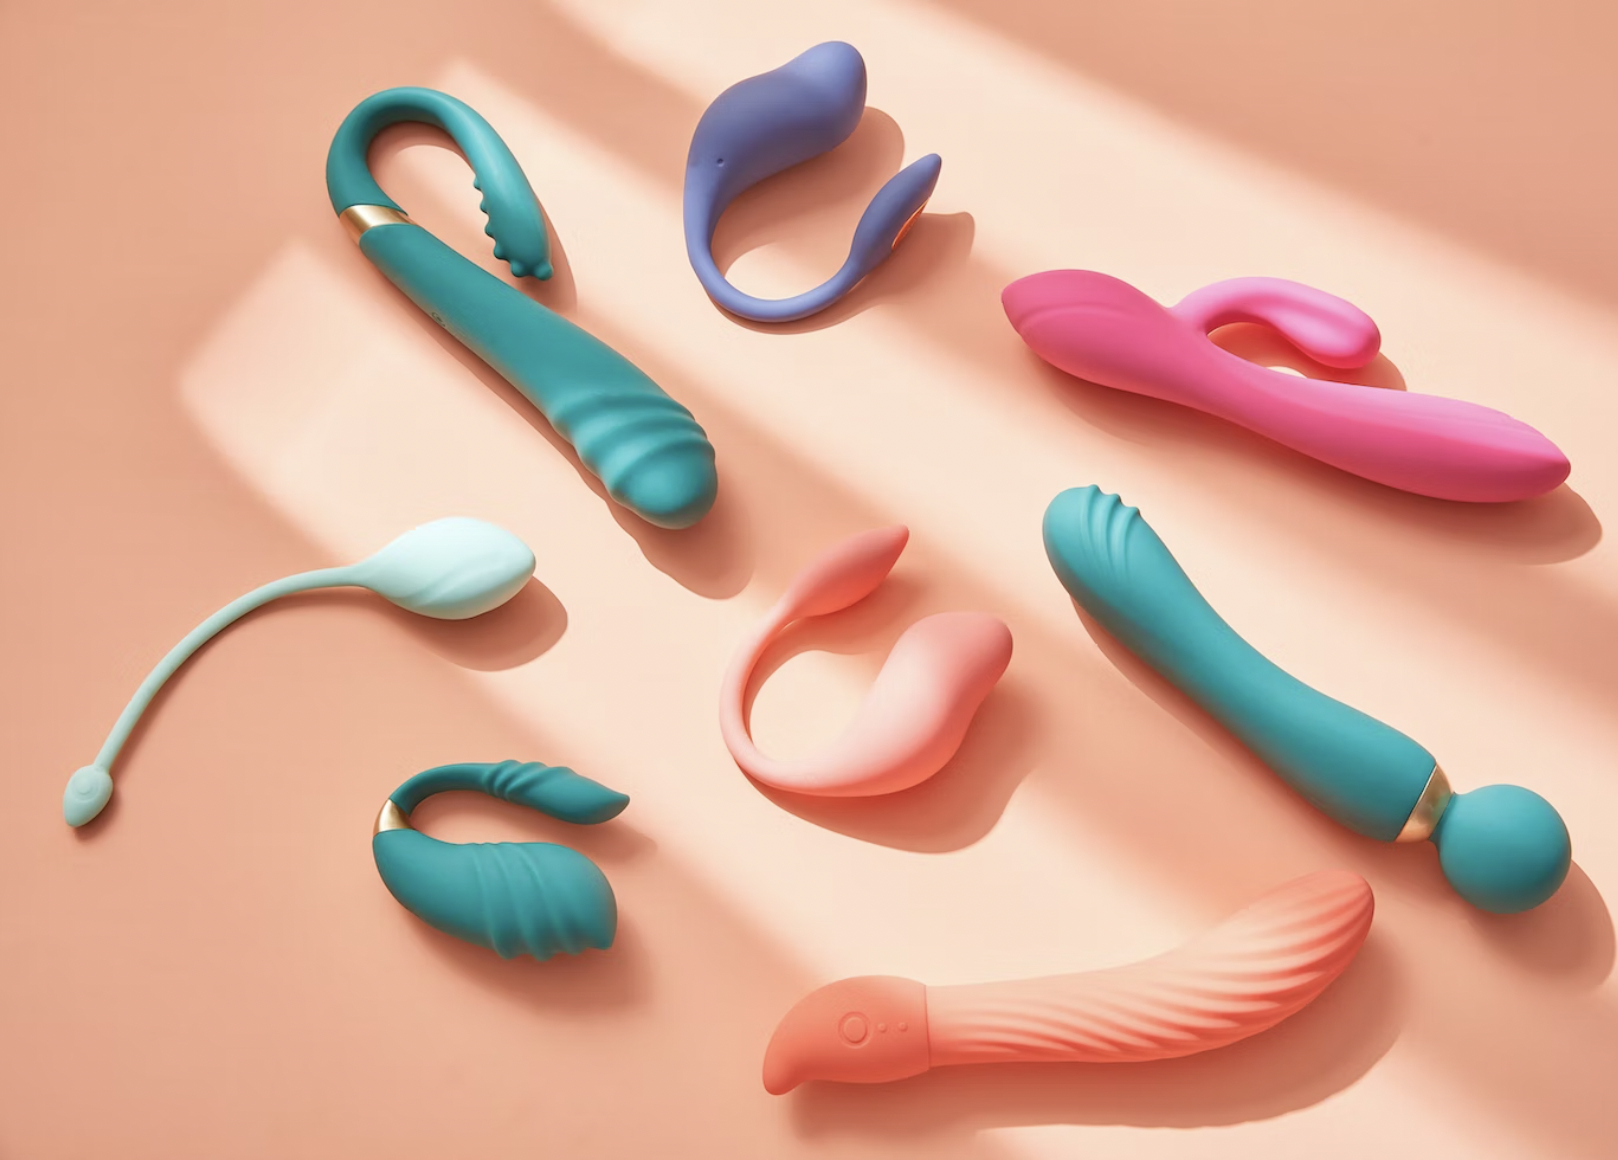 An image of different sex toys for vulva-owners spread across a peach backdrop